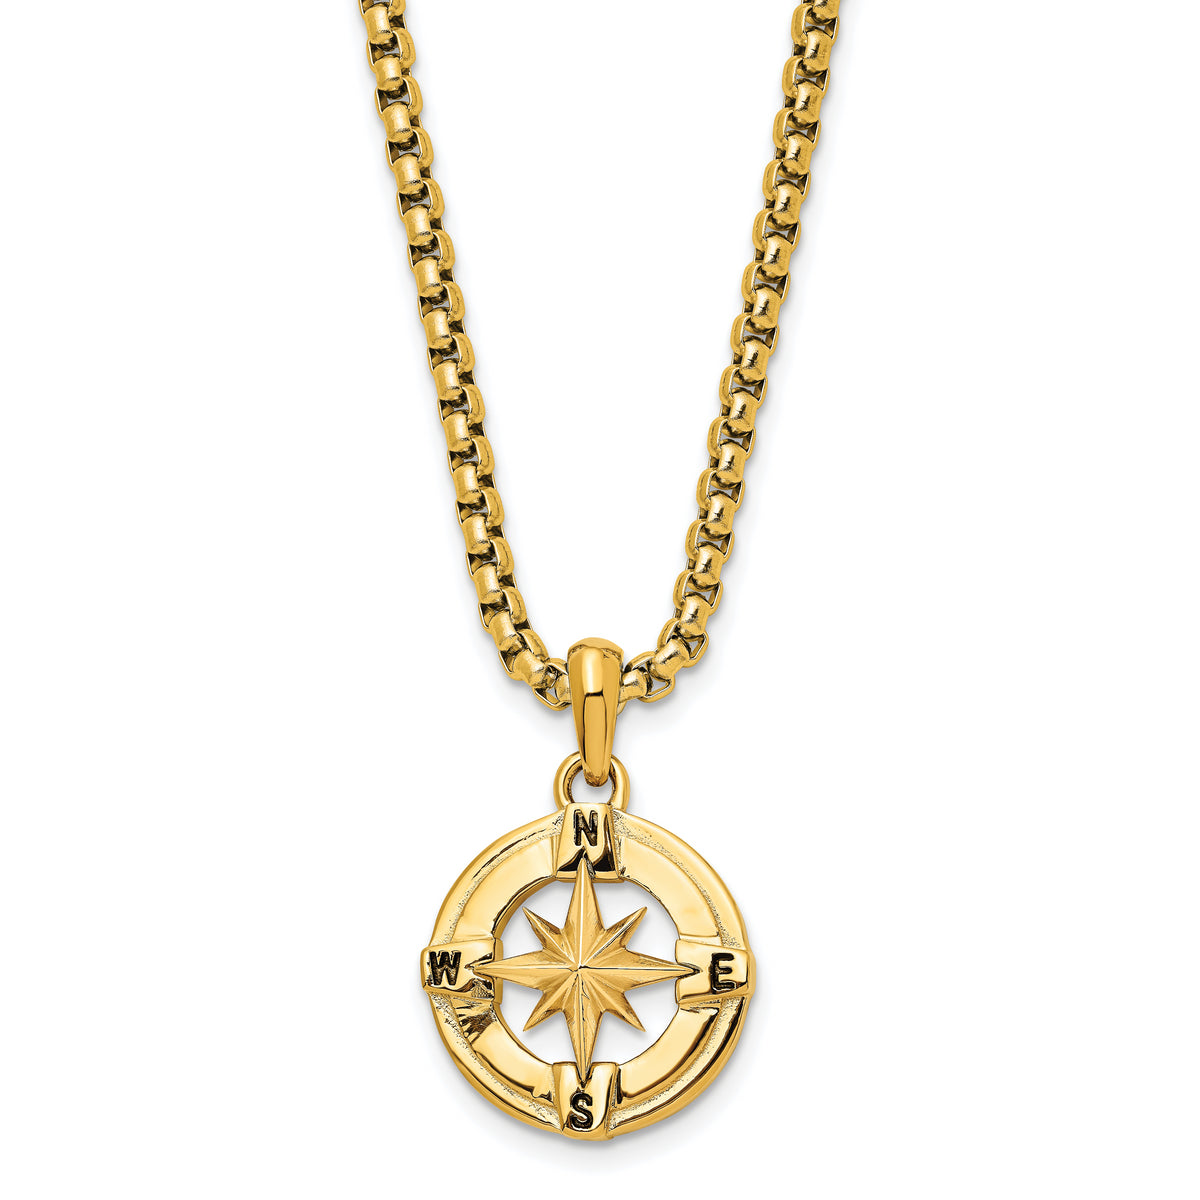 Chisel Stainless Steel Polished Yellow IP-plated Compass Pendant on a 22 inch Box Chain Necklace